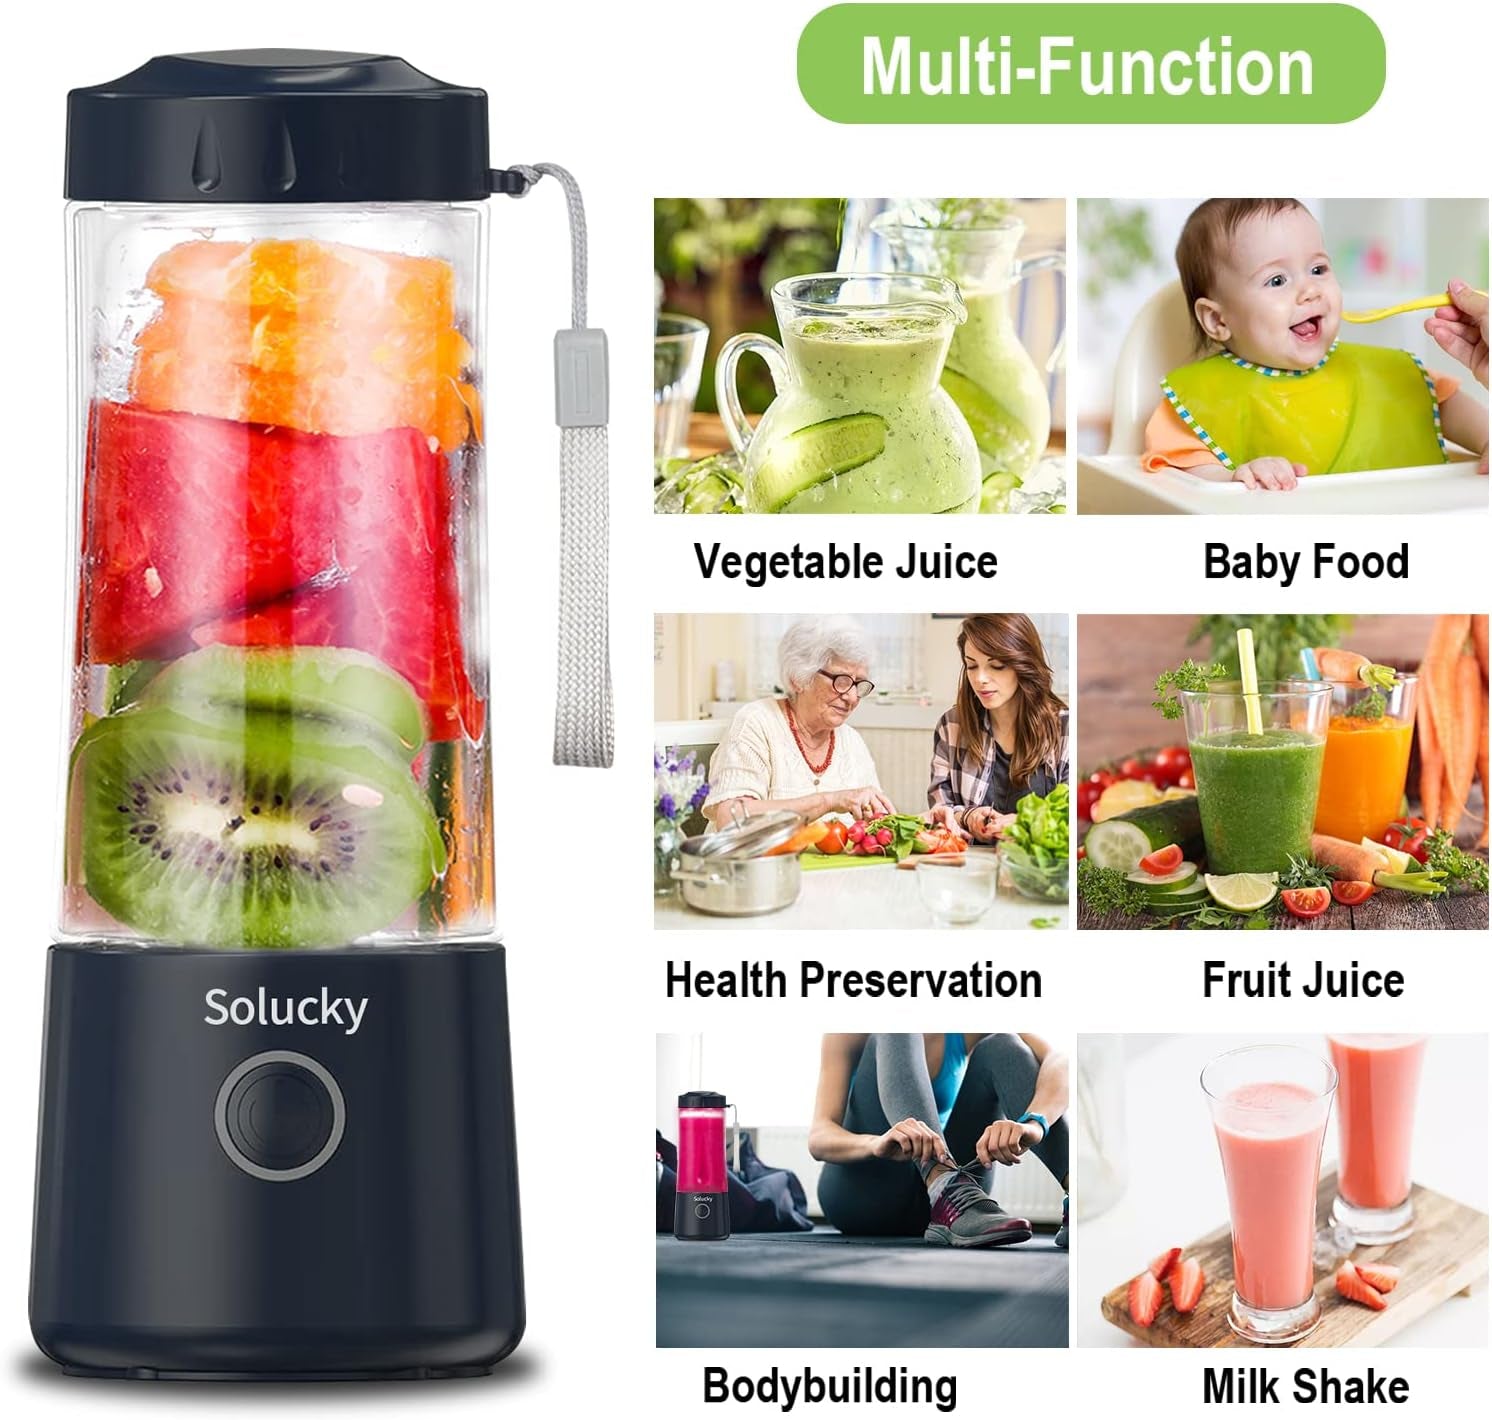 14 Oz Portable Blender, Cordless & Rechargeable, Ideal for Travel and Home Use  Solucky   